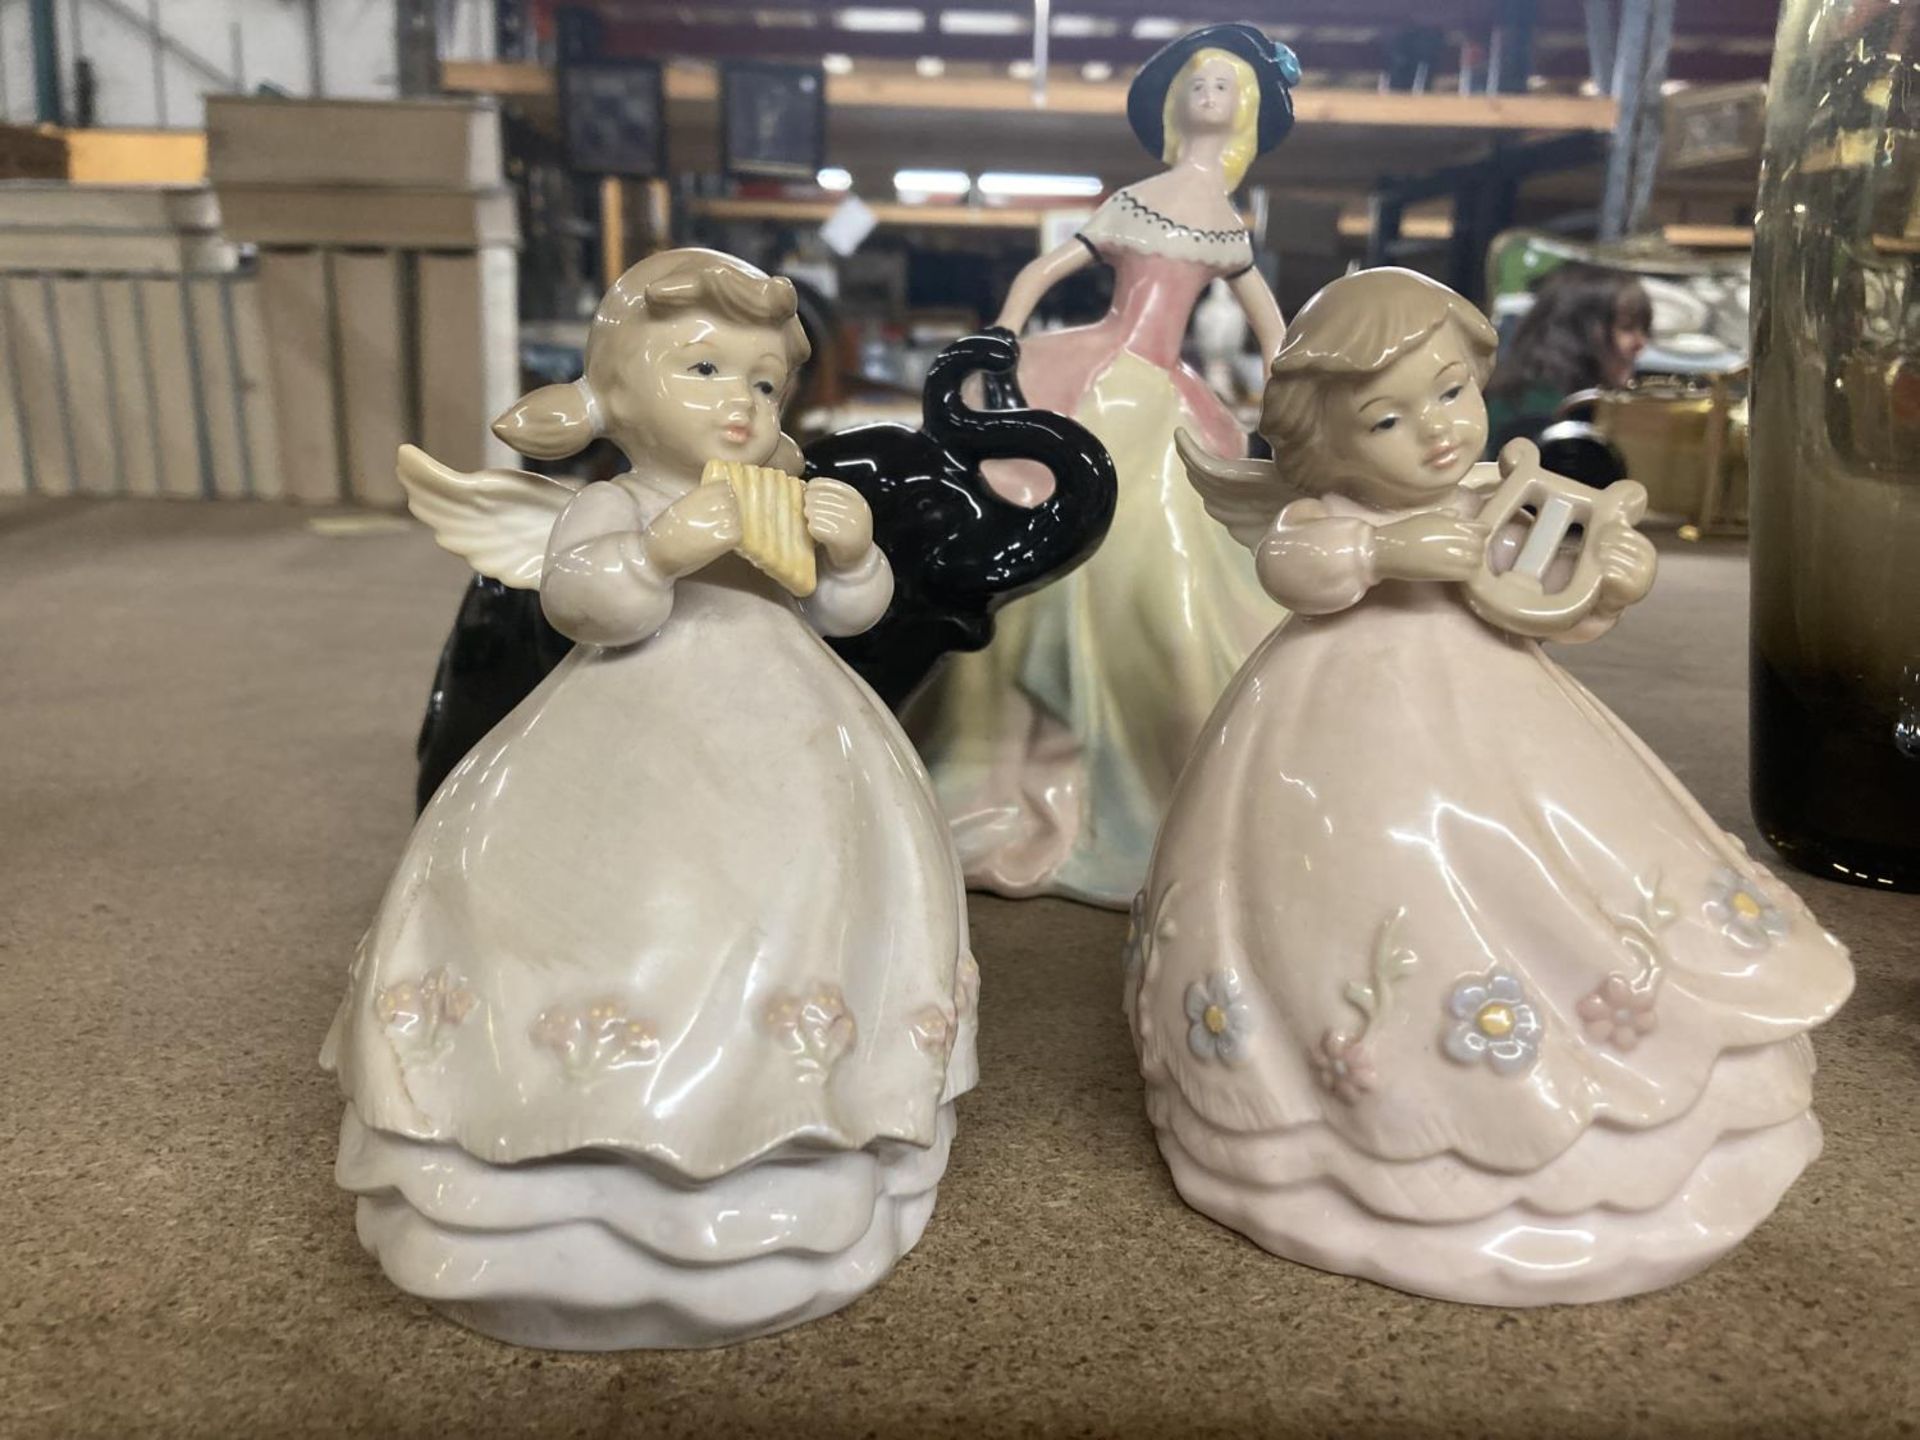 A QUANTITY OF CERAMIC ITEMS TO INCLUDE FAIRY FIGURINES, A VINTAGE LADY FIGURE AND AN ELEPHANT - Image 2 of 4